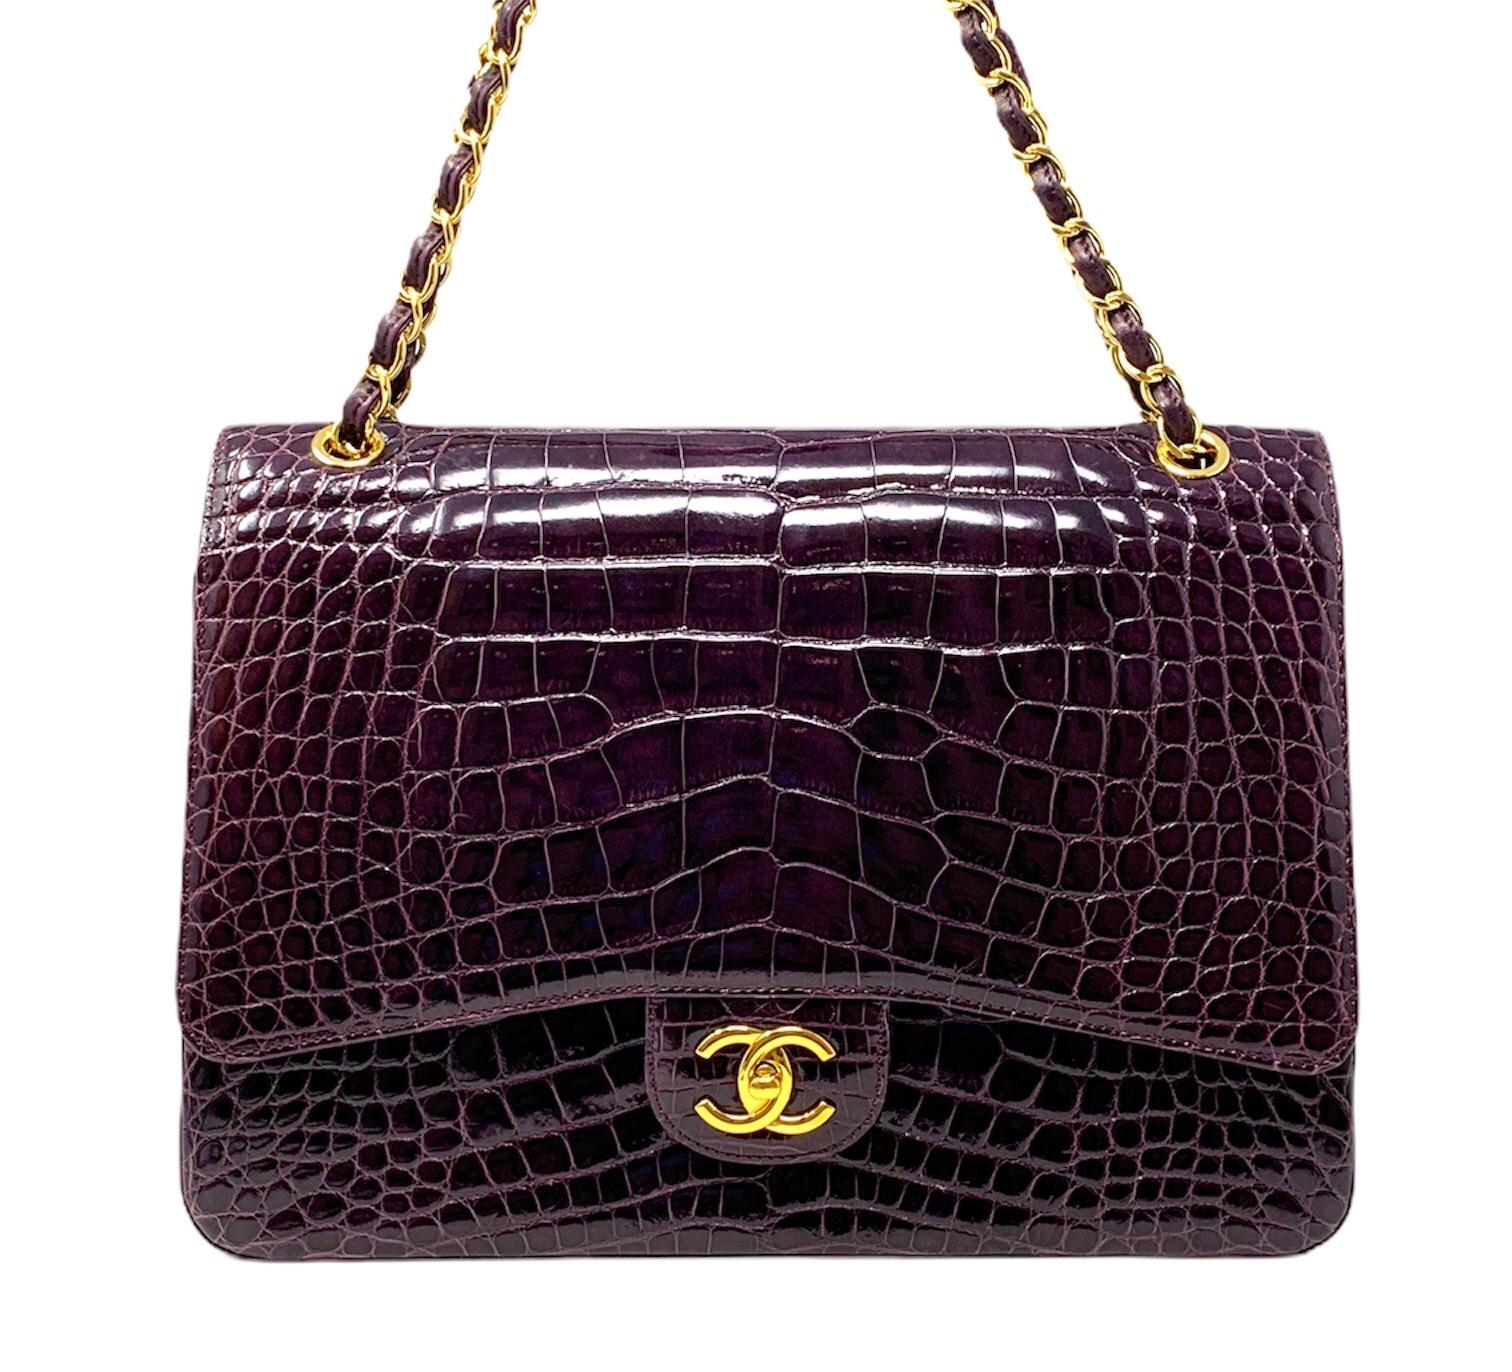 Extremely Rare and amazing Exotic Chanel Bag Maxi Jumbo Classic Timeless Bag with double flop in Shine Purple Croccodile Heather with elegant Hardware gold. This bag features a front flop with a Classic Gold Turnlock CC segnature colture, a mid-mono